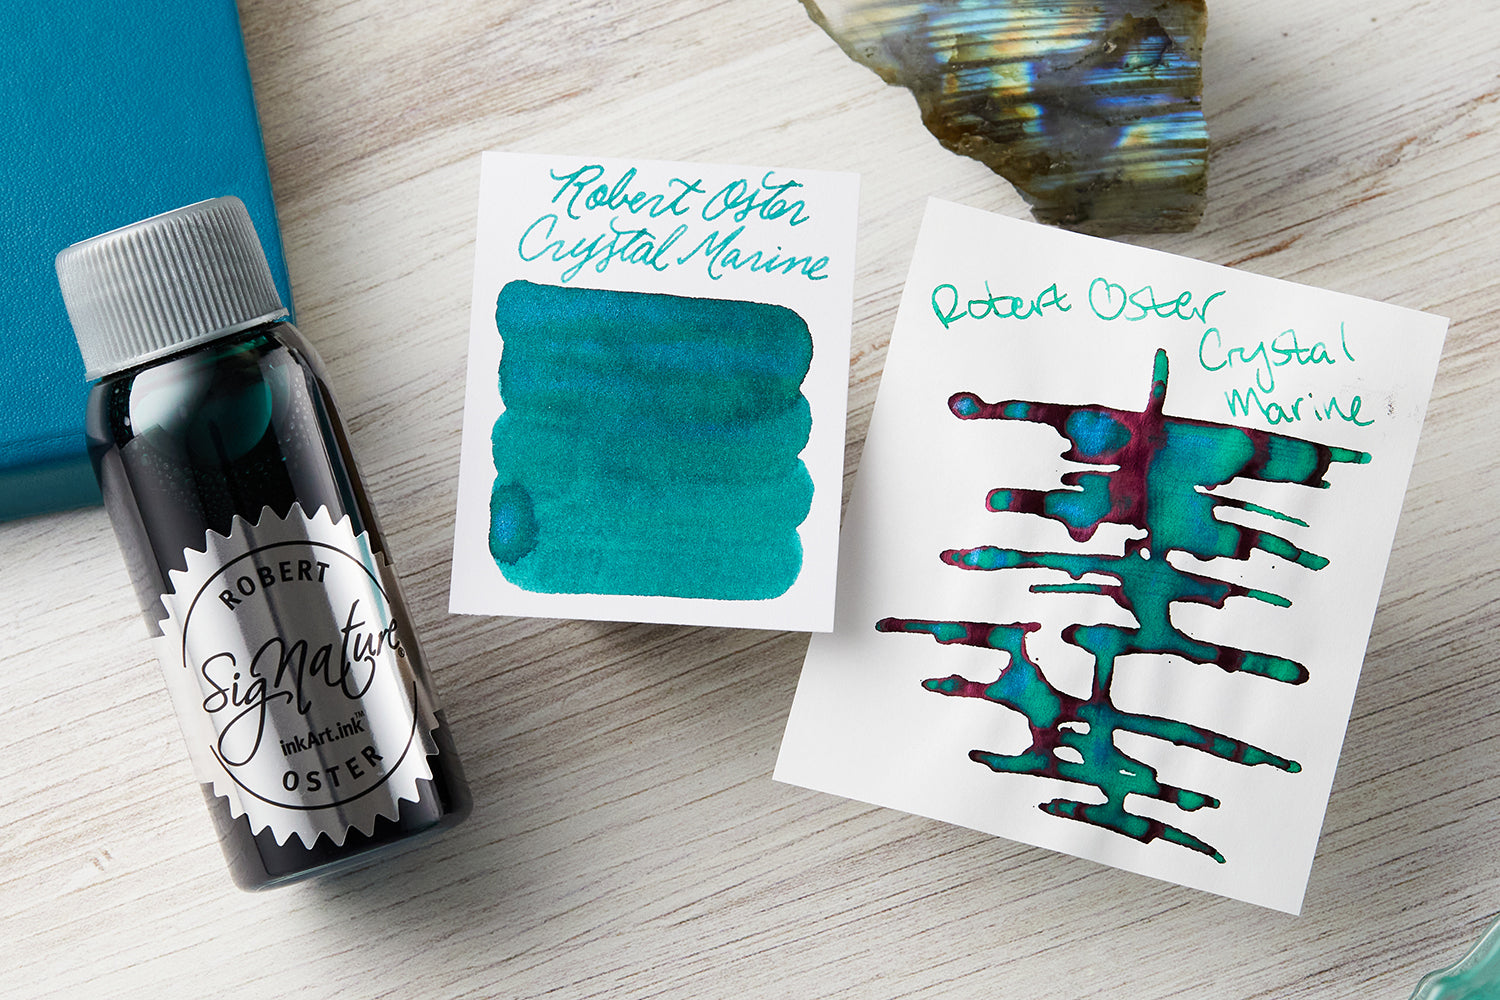 Robert Oster Fountain Pen ink bottle with 2 ink swab cards with a teal journal in the background